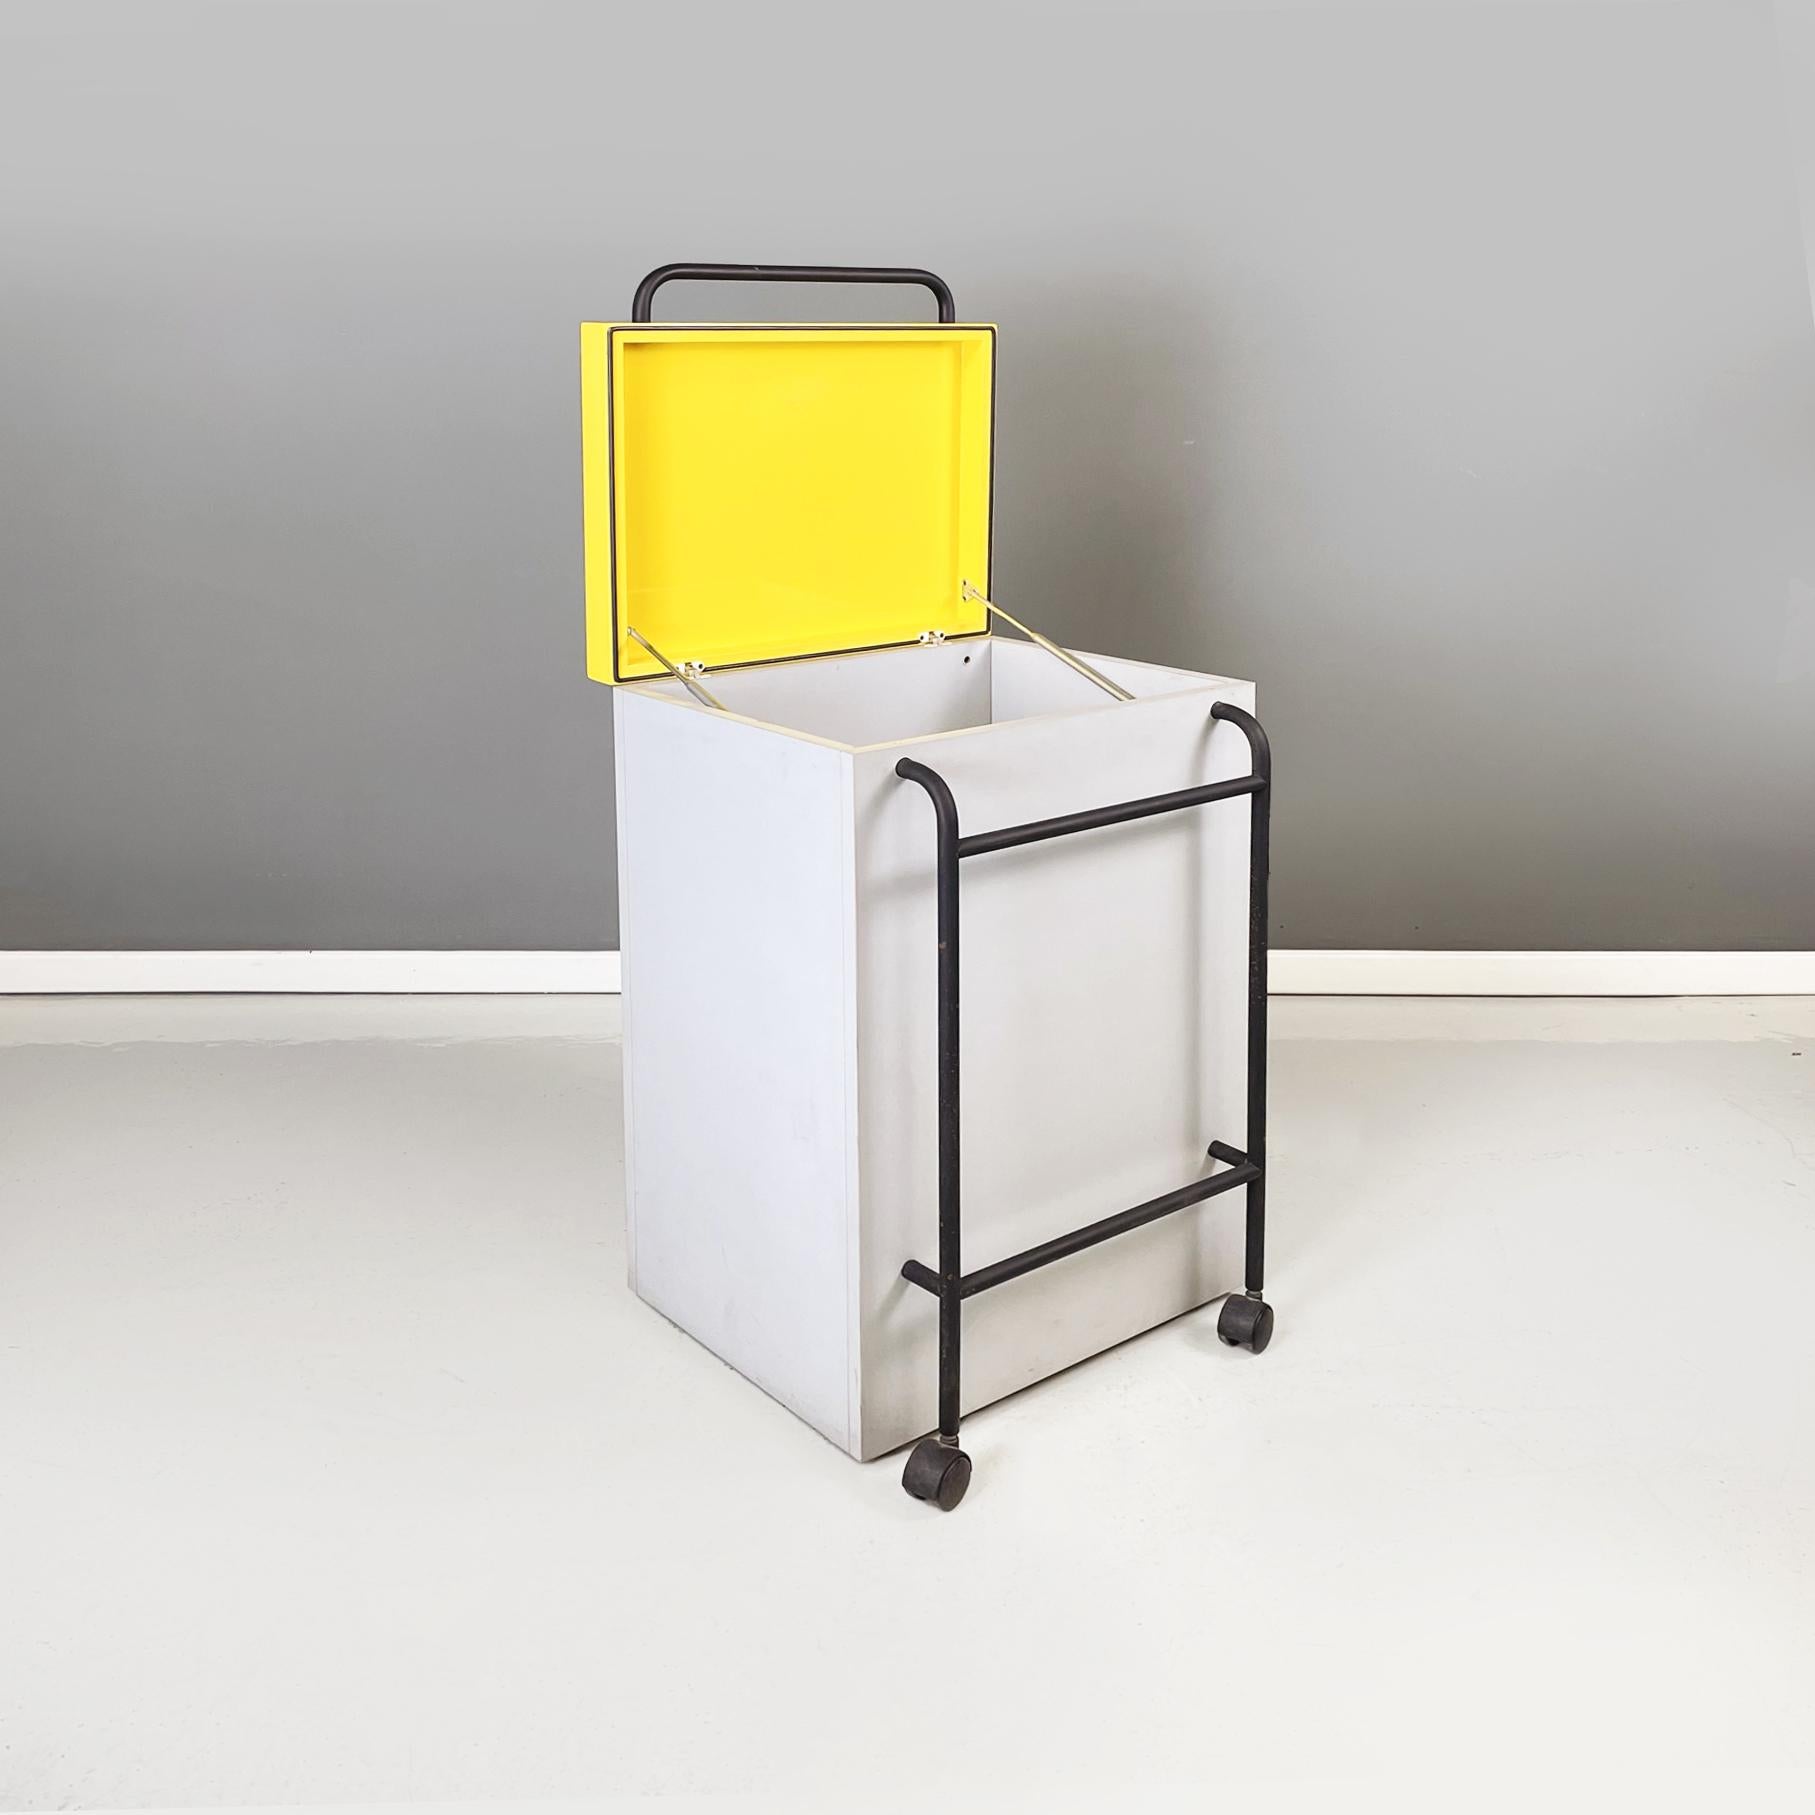 Italian modern basket container in gray and yellow wood and black metal by Robots, 1990s
Floor basket with rectangular base in wood painted in light gray and bright yellow. The lid of the yellow wooden container has a black painted tubular metal